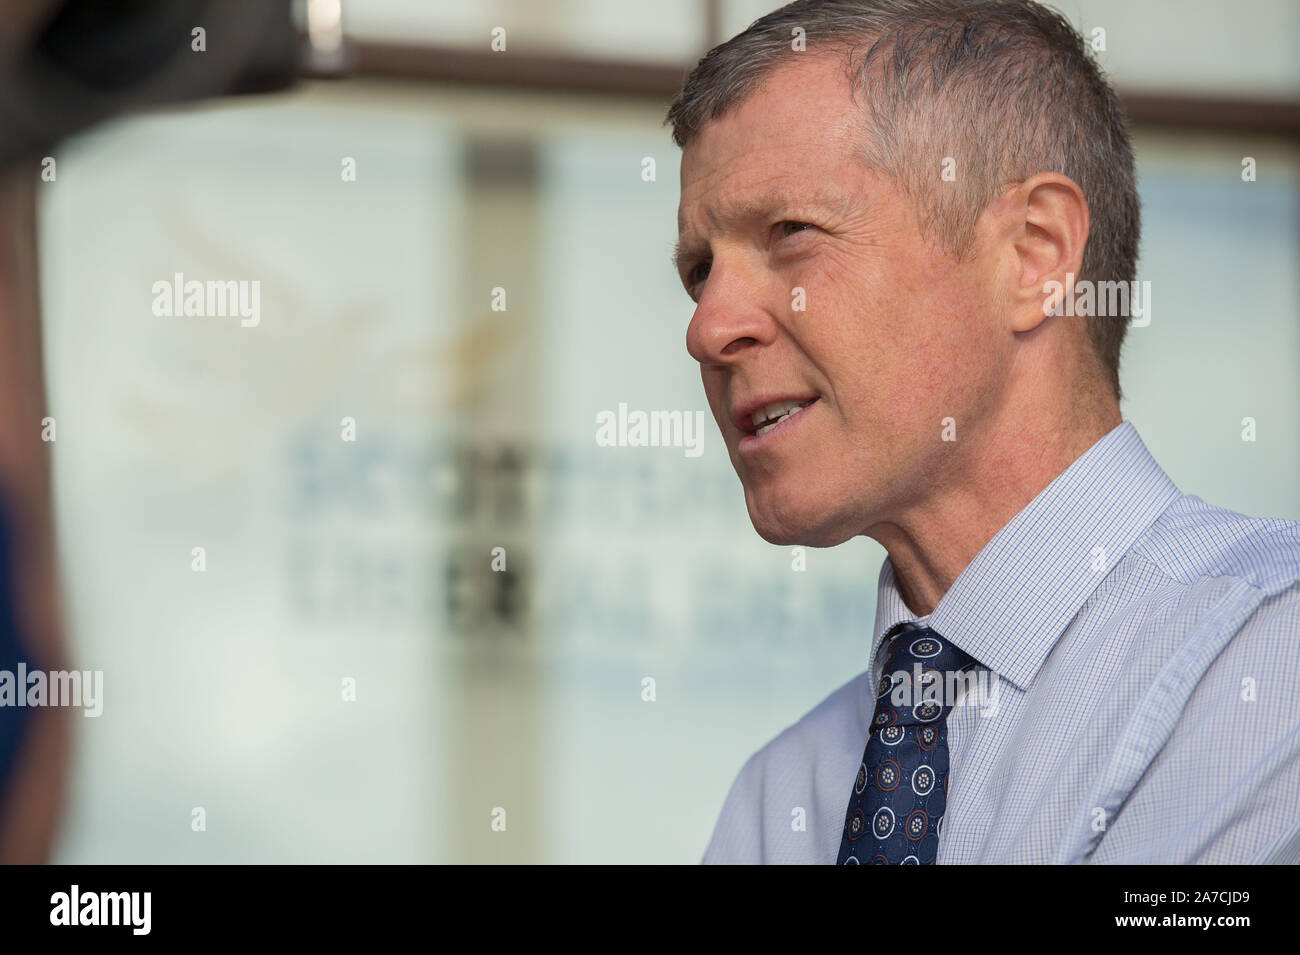 Edinburgh, 30 October 2019. Pictured: Willie Rennie MSP - Leader of the Scottish Liberal Democrat Party. Willie Rennie is at Party Headquarters this morning for a photo op to launch their election campaign.  The UK Prime Minister, Boris Johnson called a snap general election on 12th December, and the Scottish Liberal Democrats along with the UK Liberal Democrats are looking to take over and stop Brexit. Credit: Colin Fisher/Alamy Live News Stock Photo